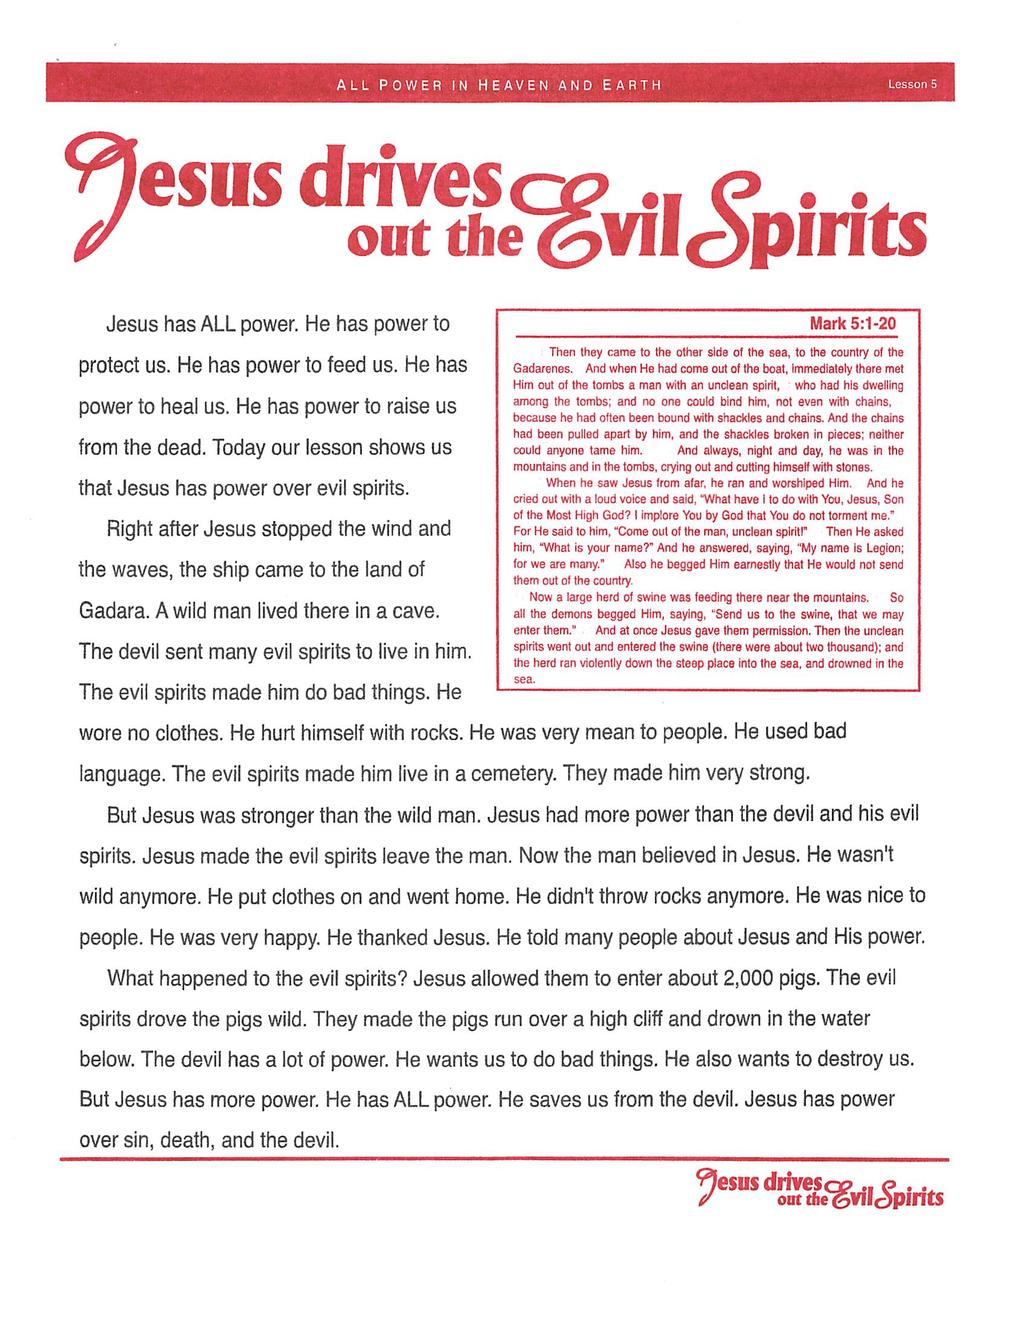 ALL POWER IN HEAVEN AND EARTH esiis drives out the 0Vllc9PintS Jesus has ALL power. He has power to protect us. He has power to feed us. He has power to heal us.